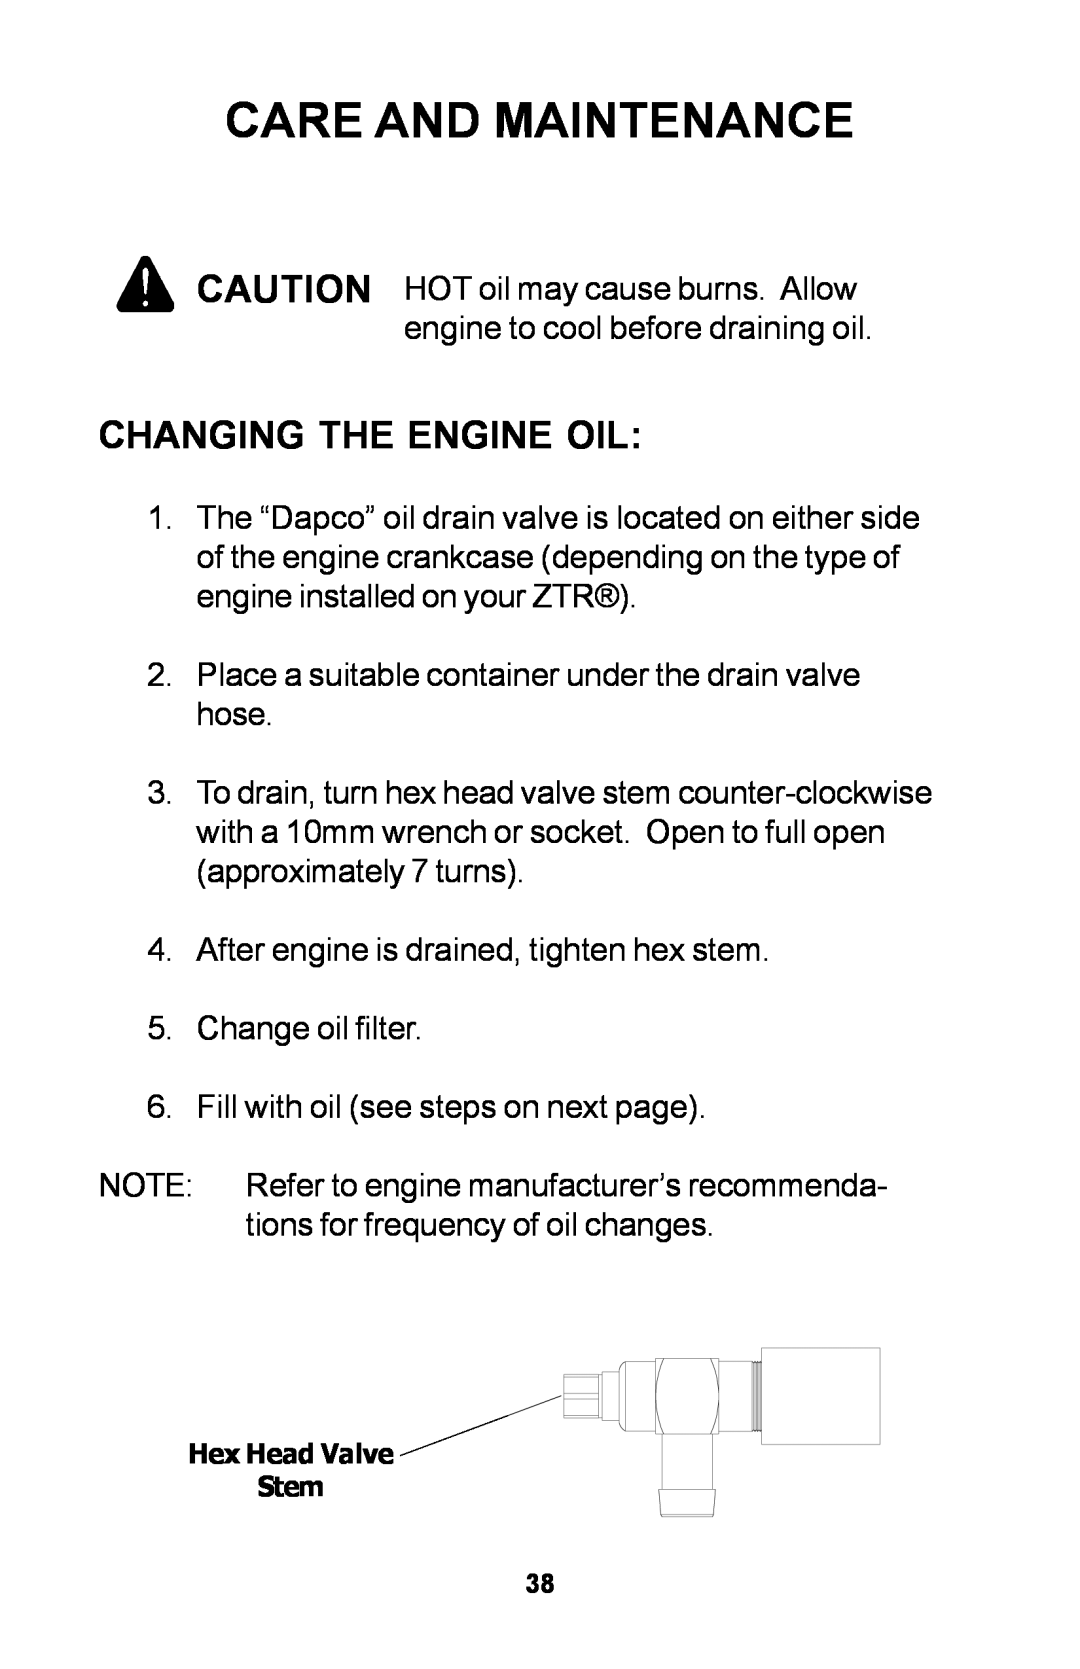 Dixon ZTR manual Changing The Engine Oil, Care And Maintenance 